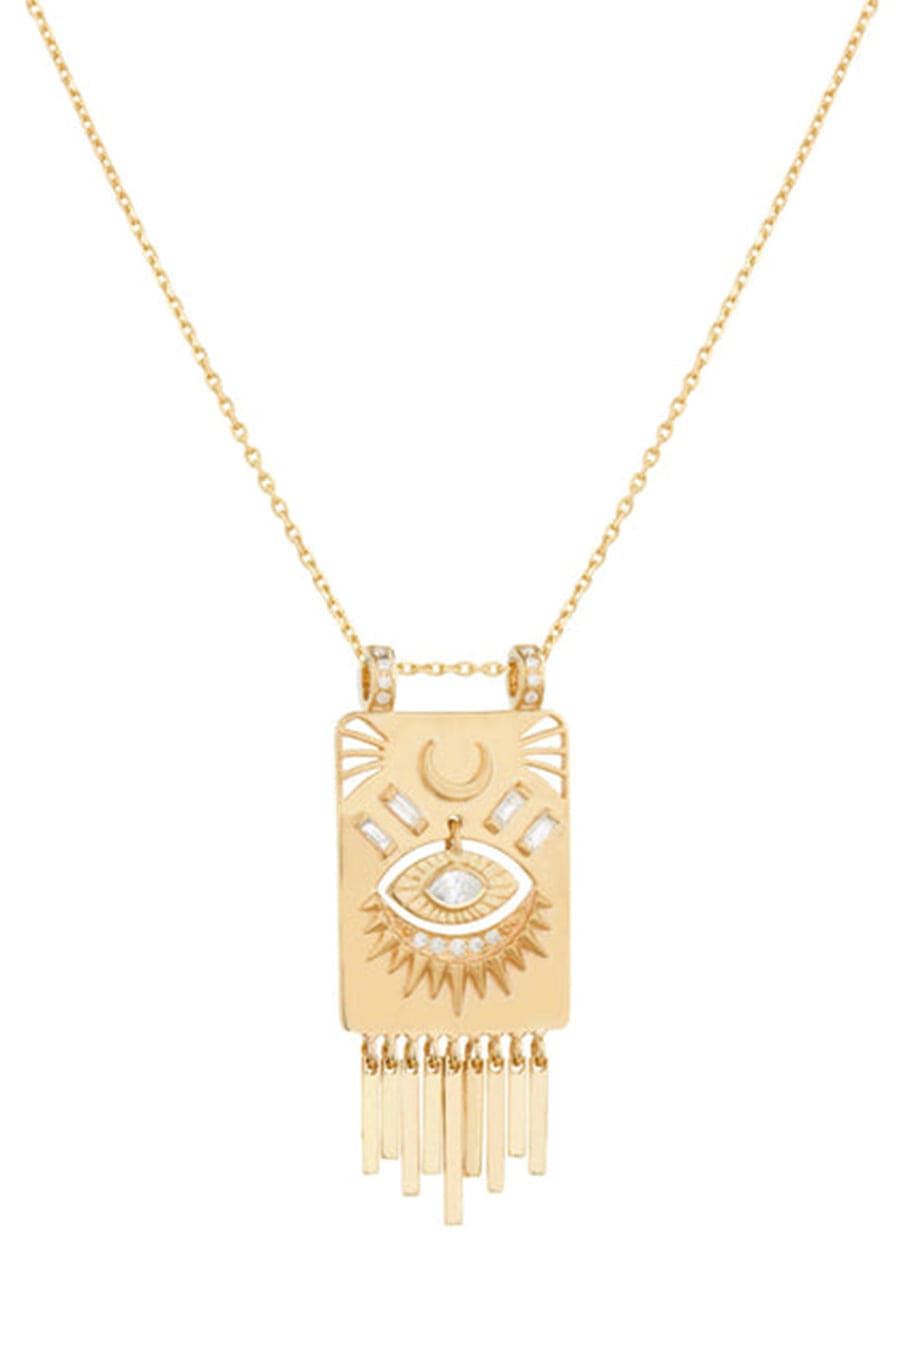 CELINE DAOUST-Gold Plate & Dangling Eye Diamonds Necklace-YELLOW GOLD